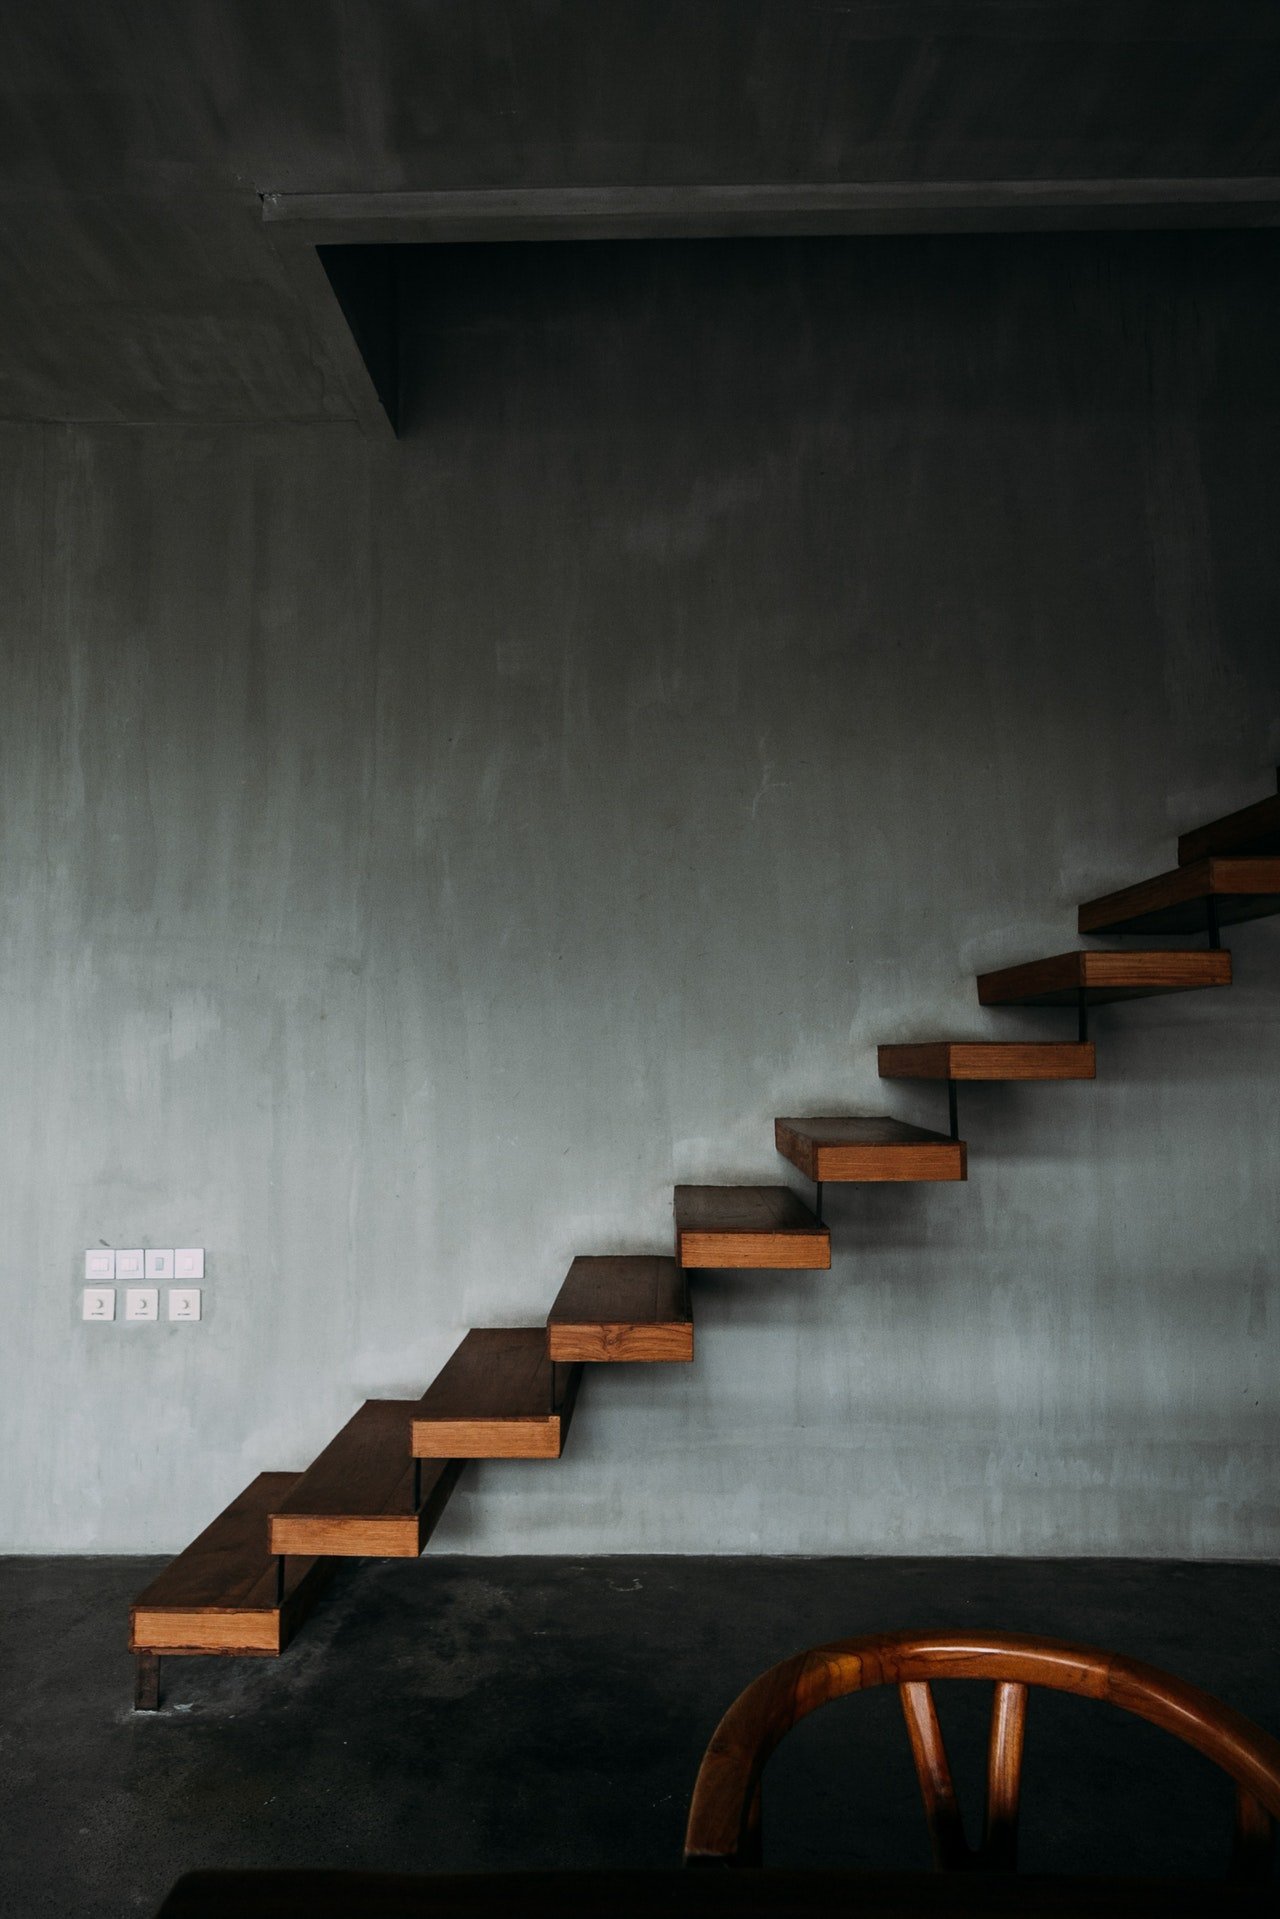 There was a staircase leading down. | Source: Pexels